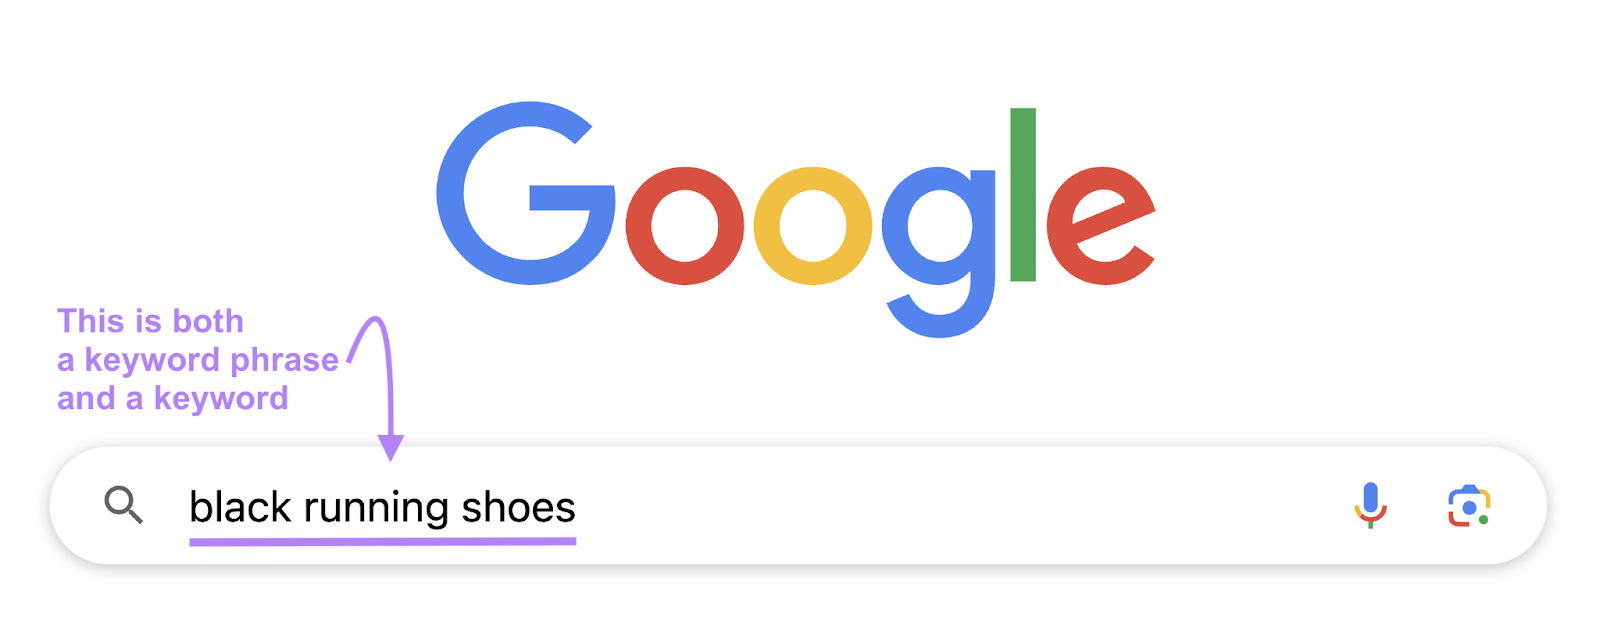 "black moving  shoes" keyword entered into Google search